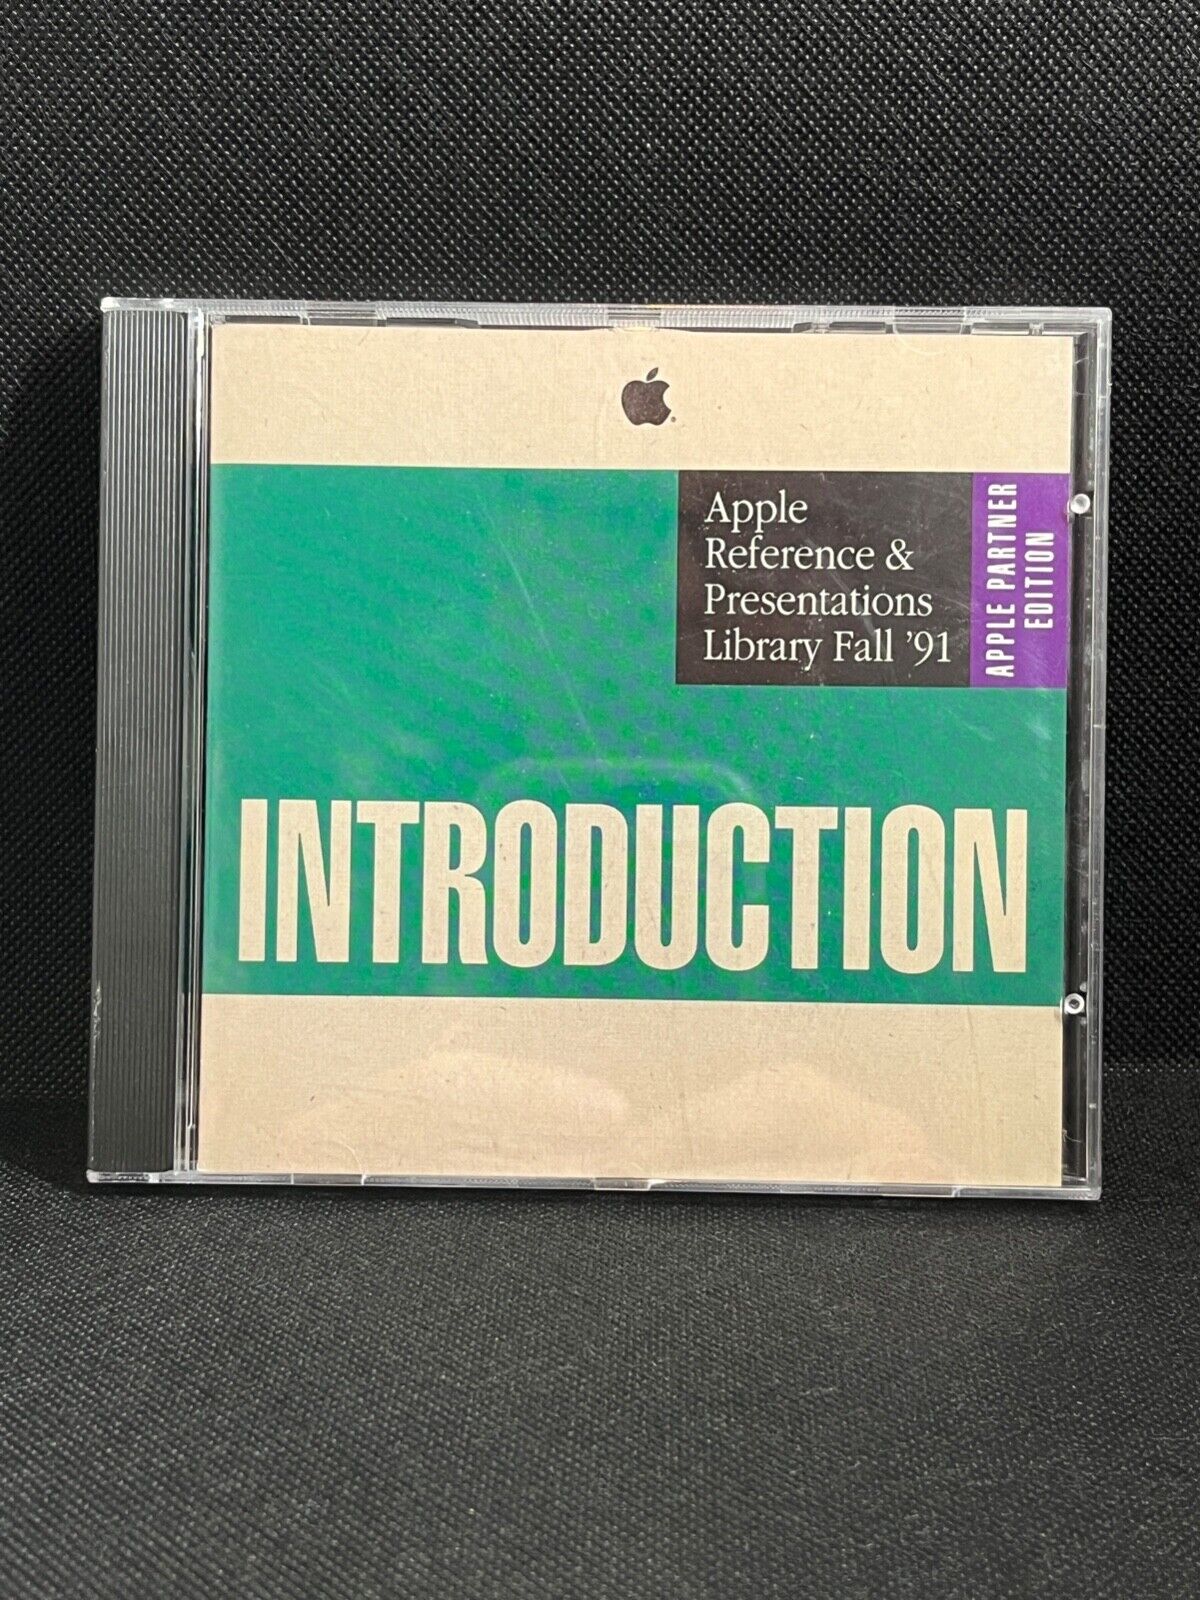 Vintage, rare and collectible, 1991 Apple Reference & Presentations Library Fall